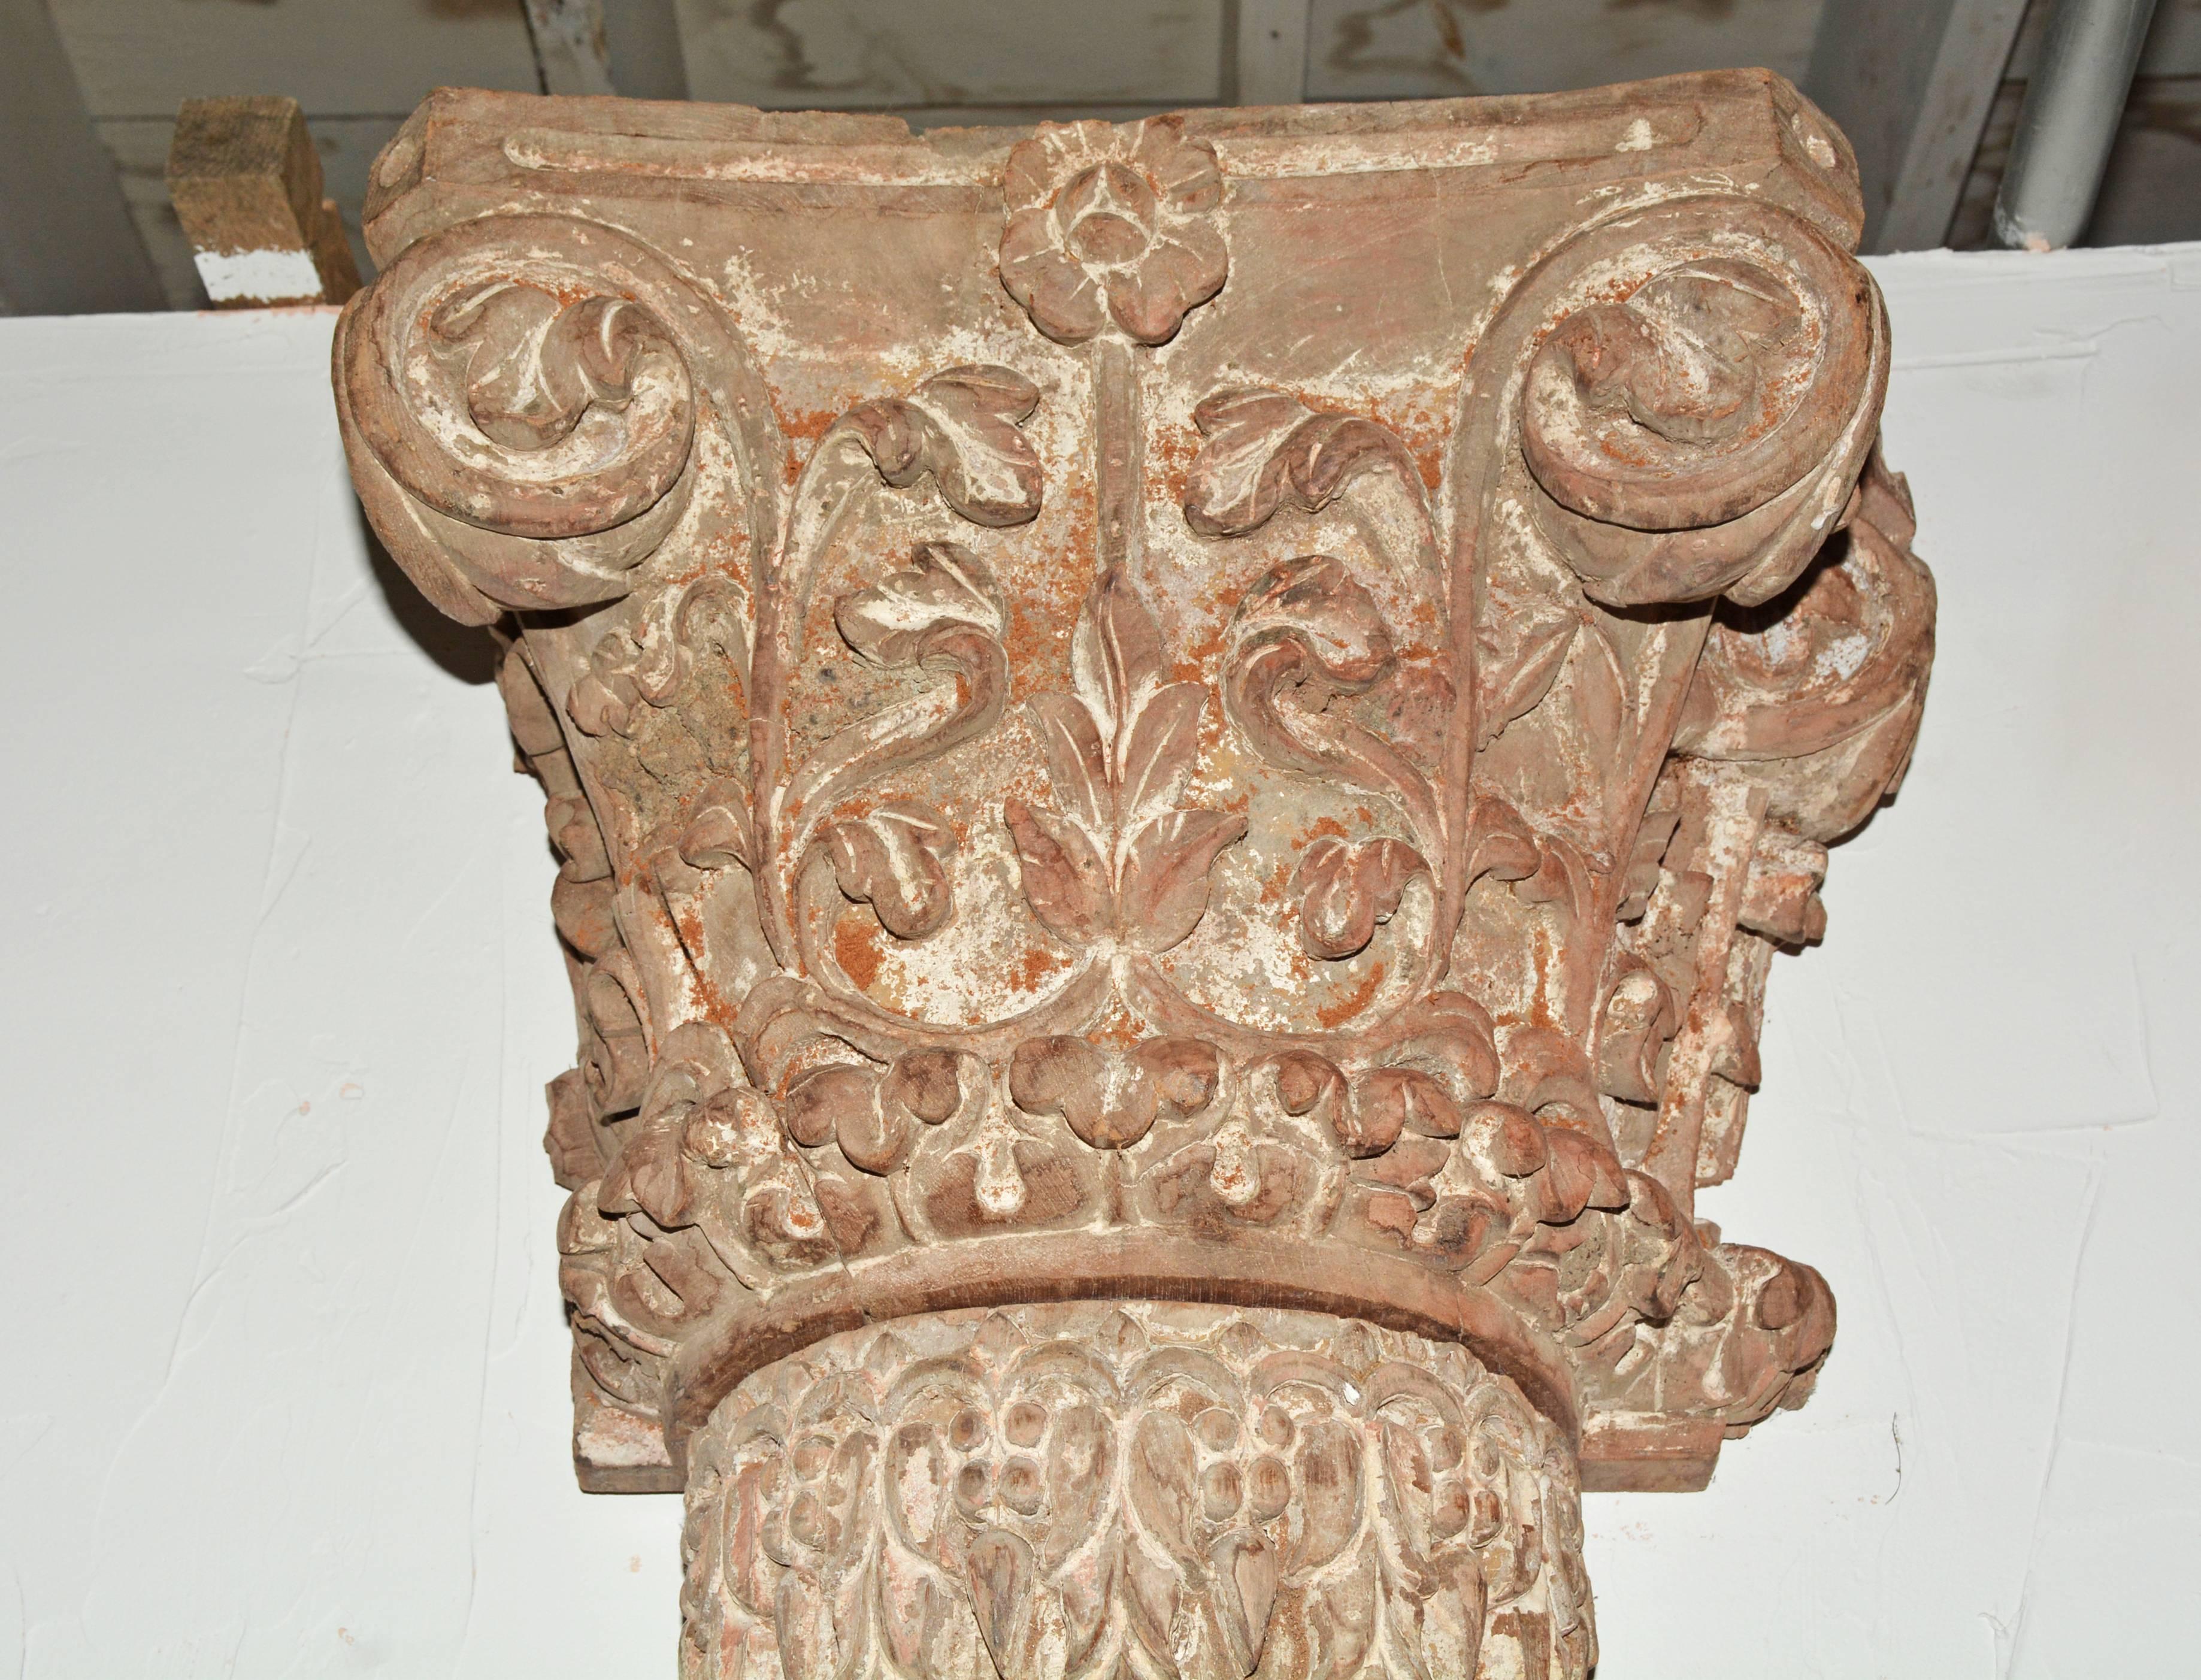 The pair of antique pilasters have semicircular fluted shafts, decorative bases and flat backs, all hand-carved. Also carved by hand with leaves and vines are the matching Corinthian capitals with flat backs, the whole unique scheme may be attached